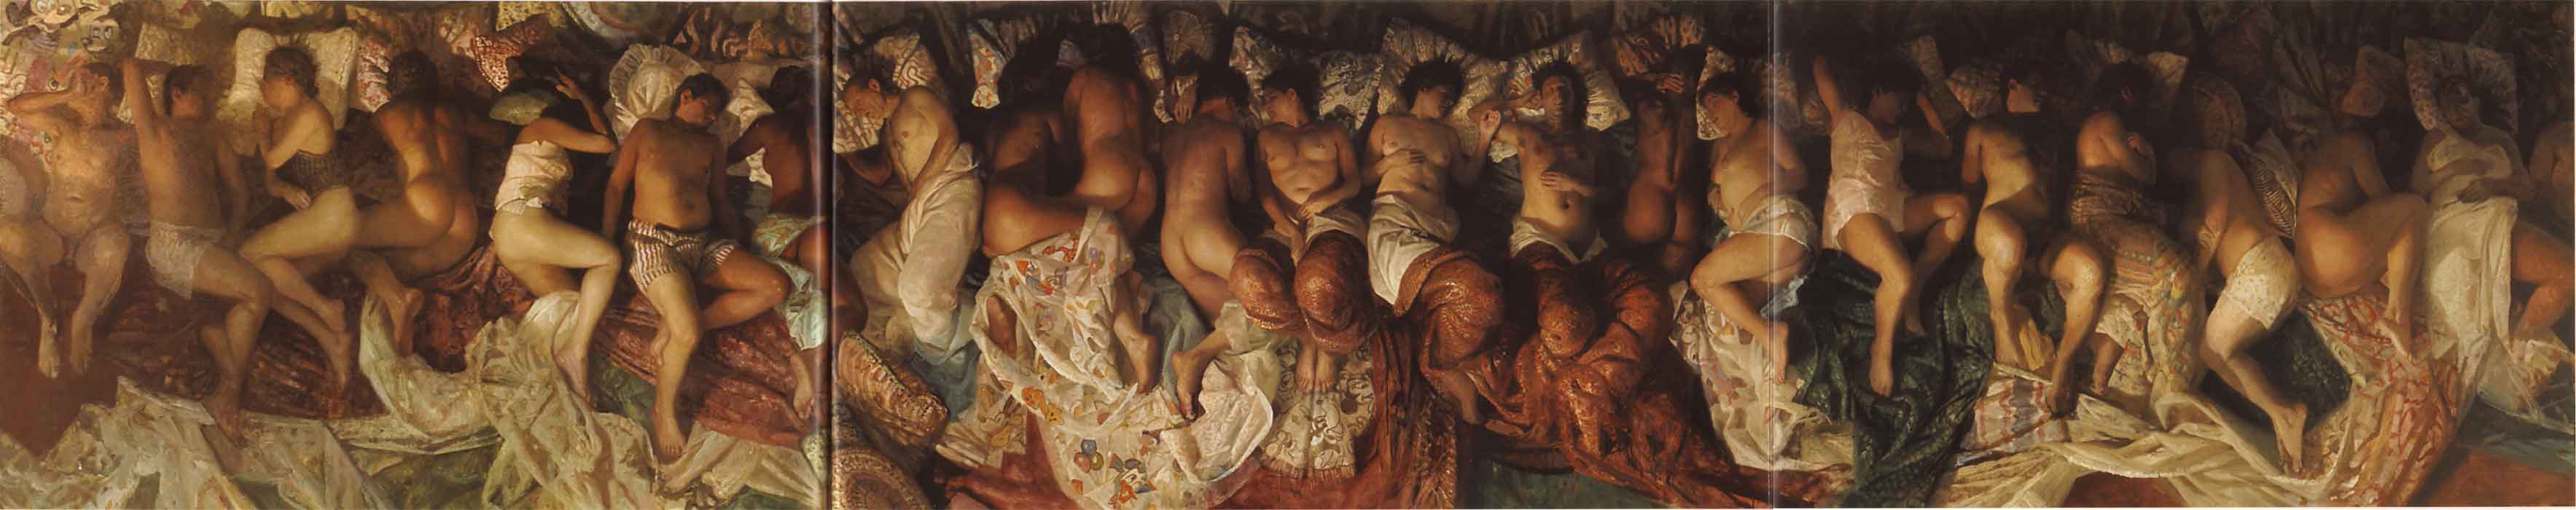 This is the painting by Vincent Desiderio, titled 'Sleep' that allegedly inspired Kanye West's "Famous" music video